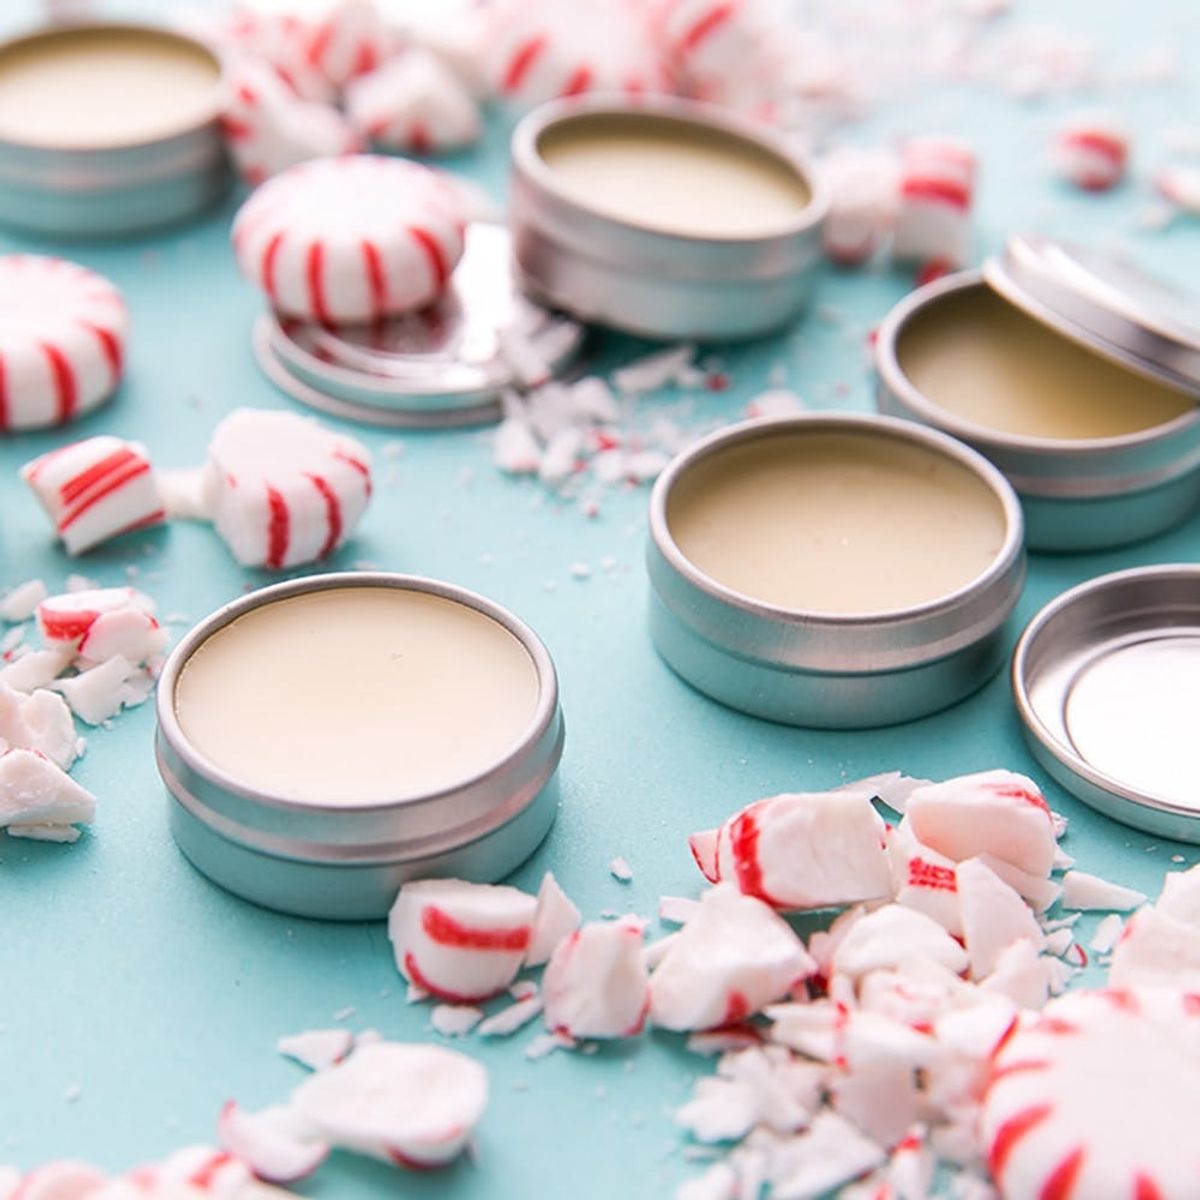 Whip Up This Deliciously Simple DIY Peppermint Lip Balm